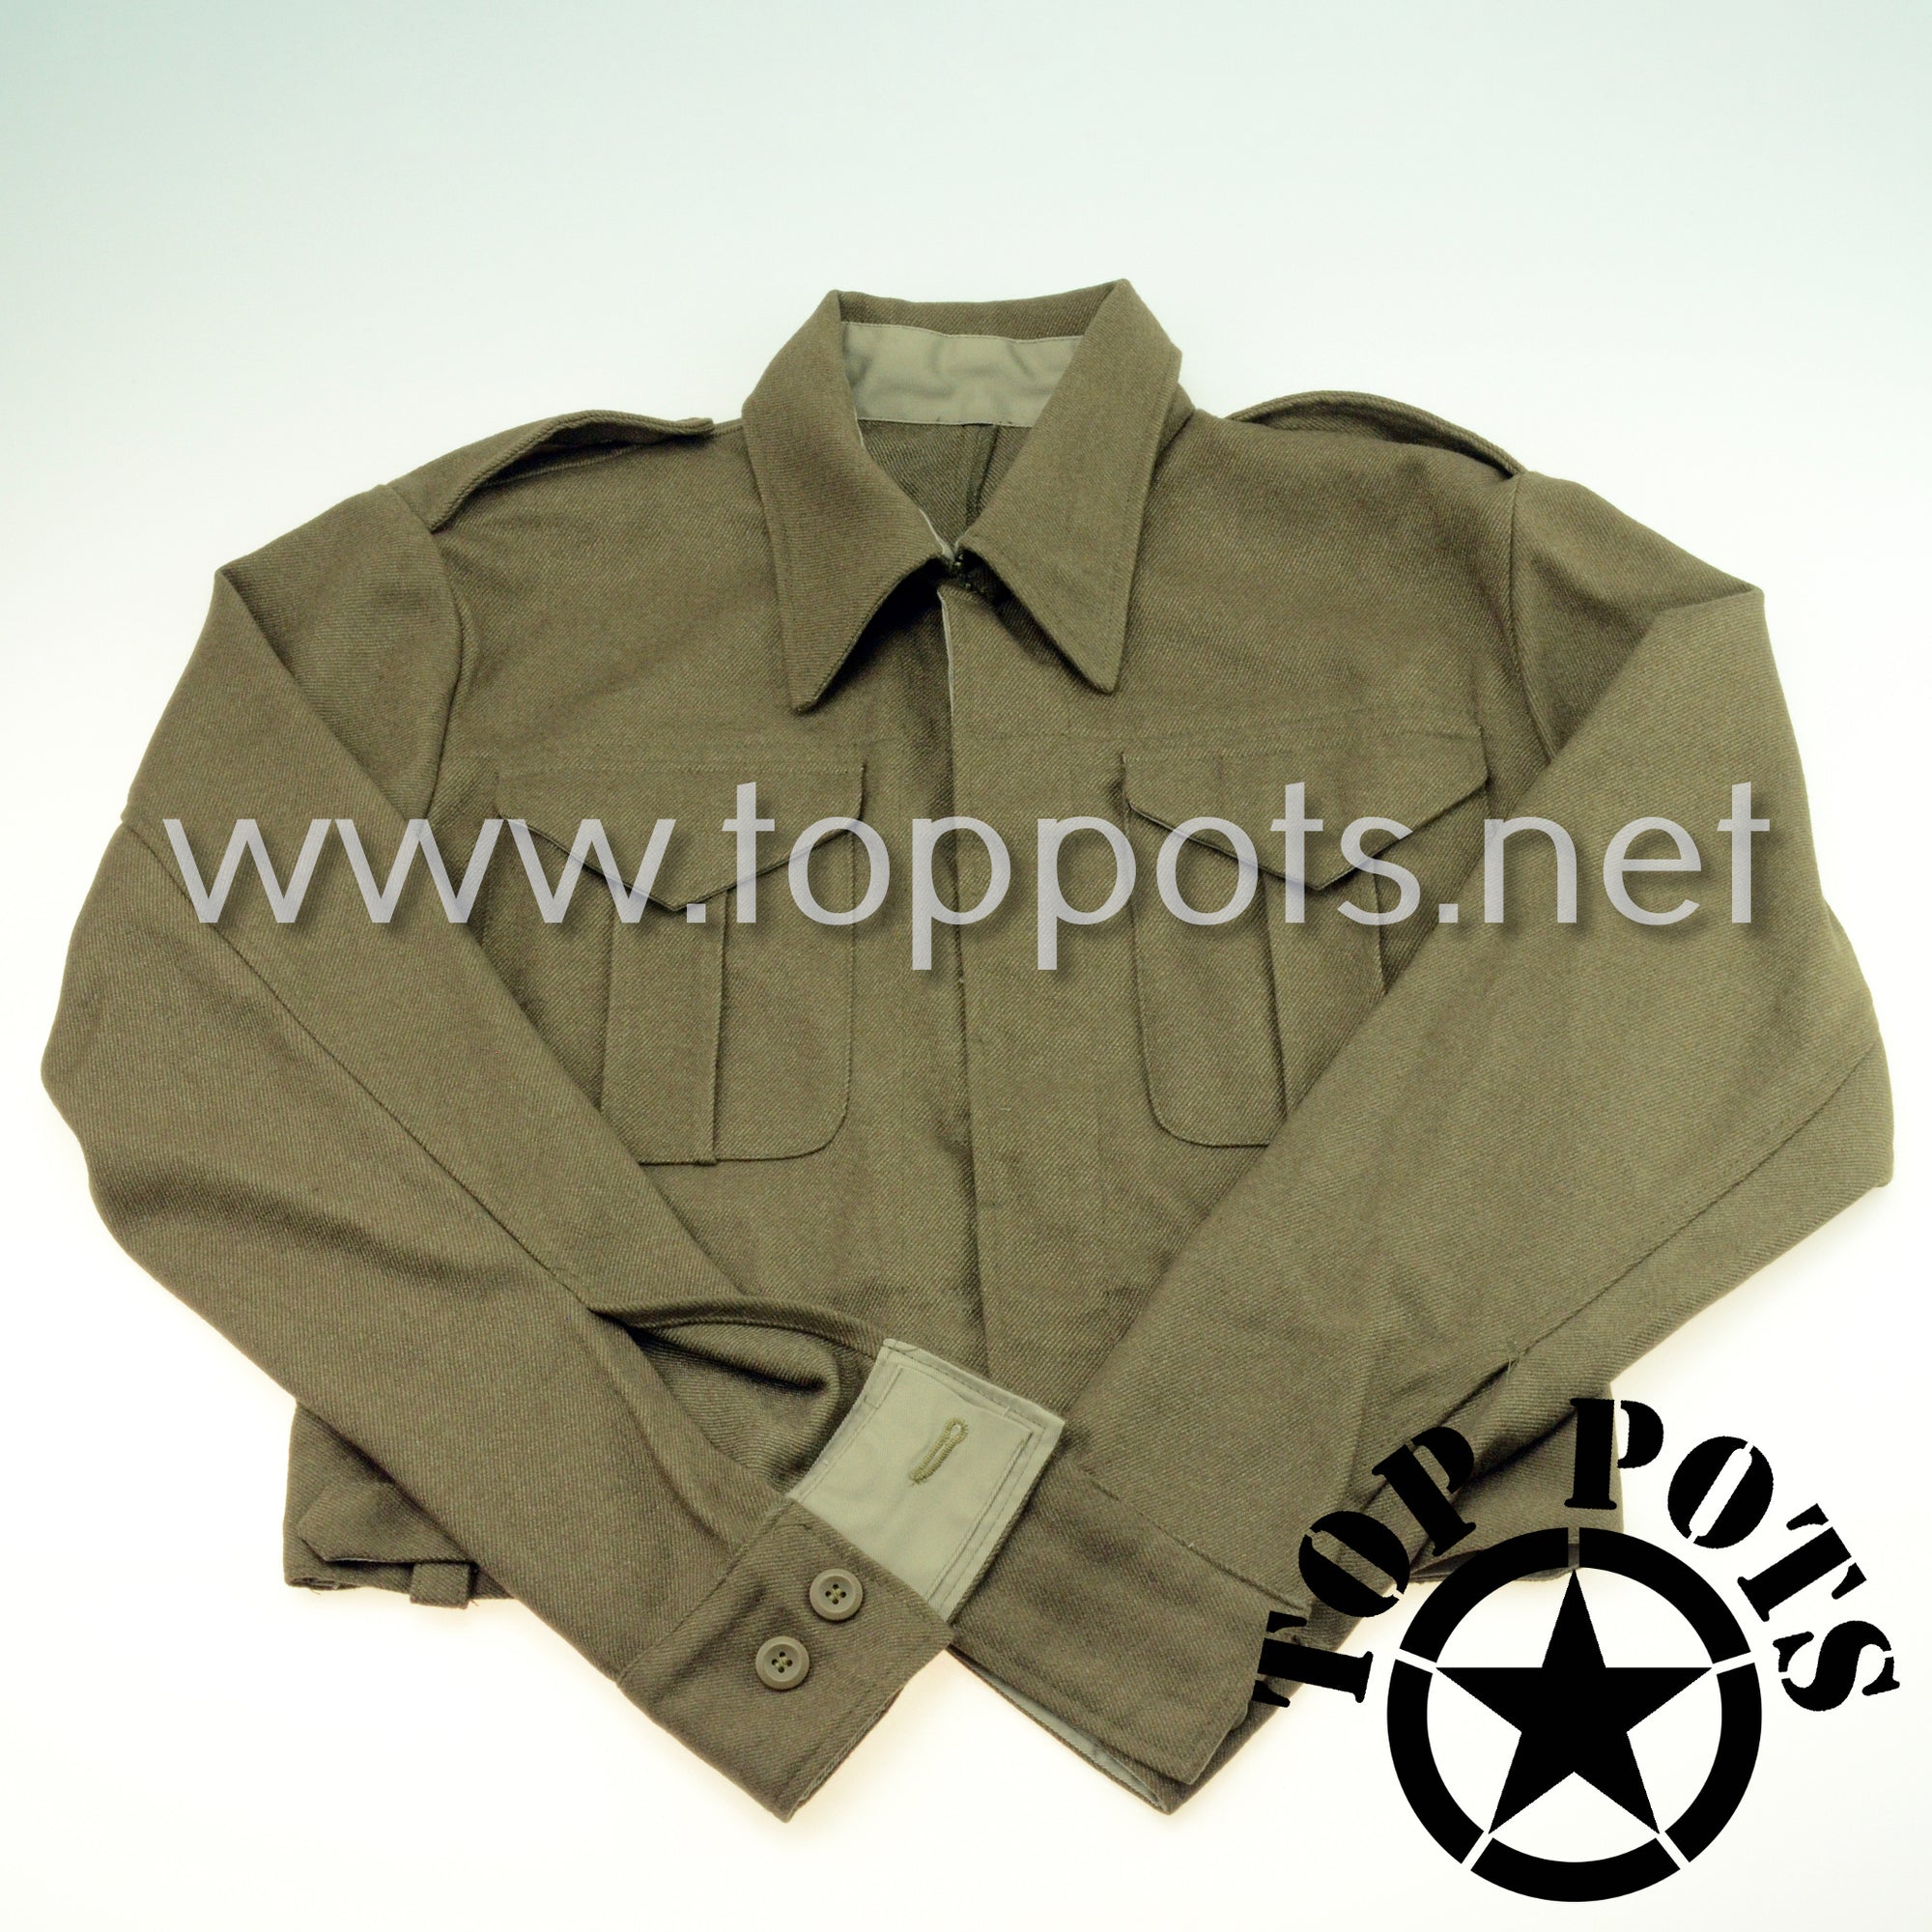 Featured Uniform - Reproduction WWII British Army P37 Battle Dress Uniform Wool Jacket (Jacket Only)